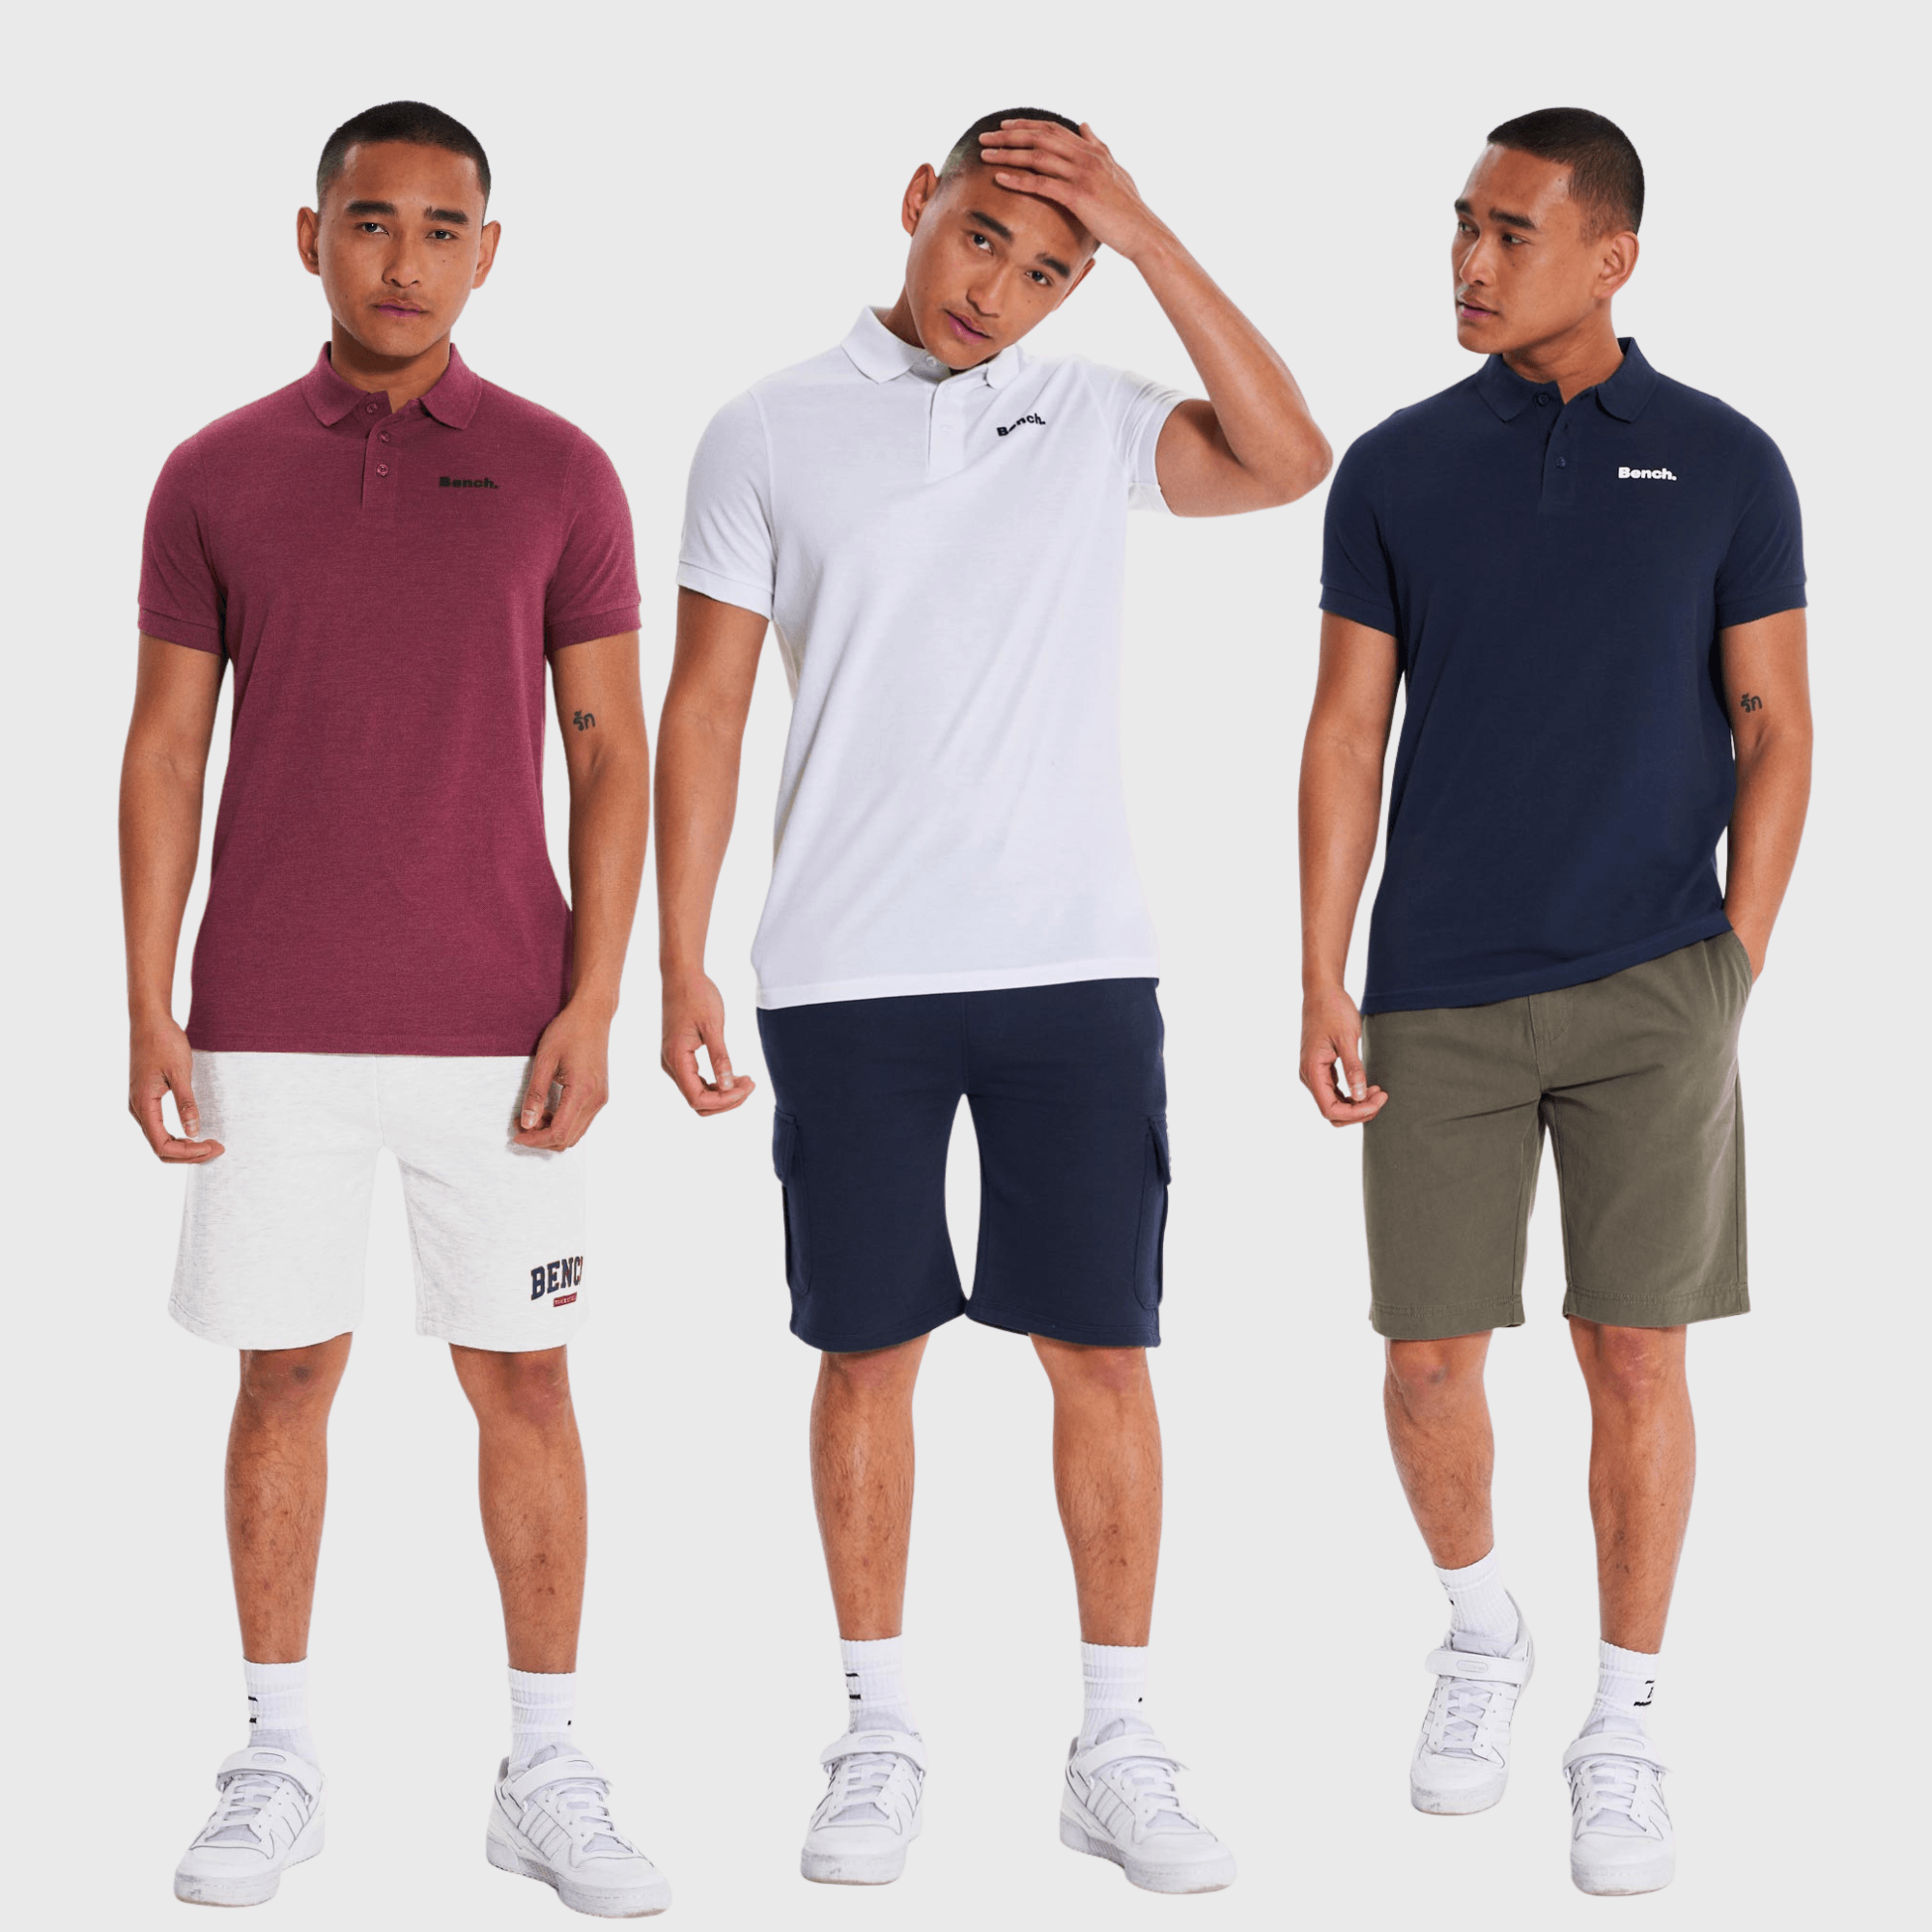 Mens ’BLANKA’ 3 Pack Polos - ASSORTED - M / Assorted